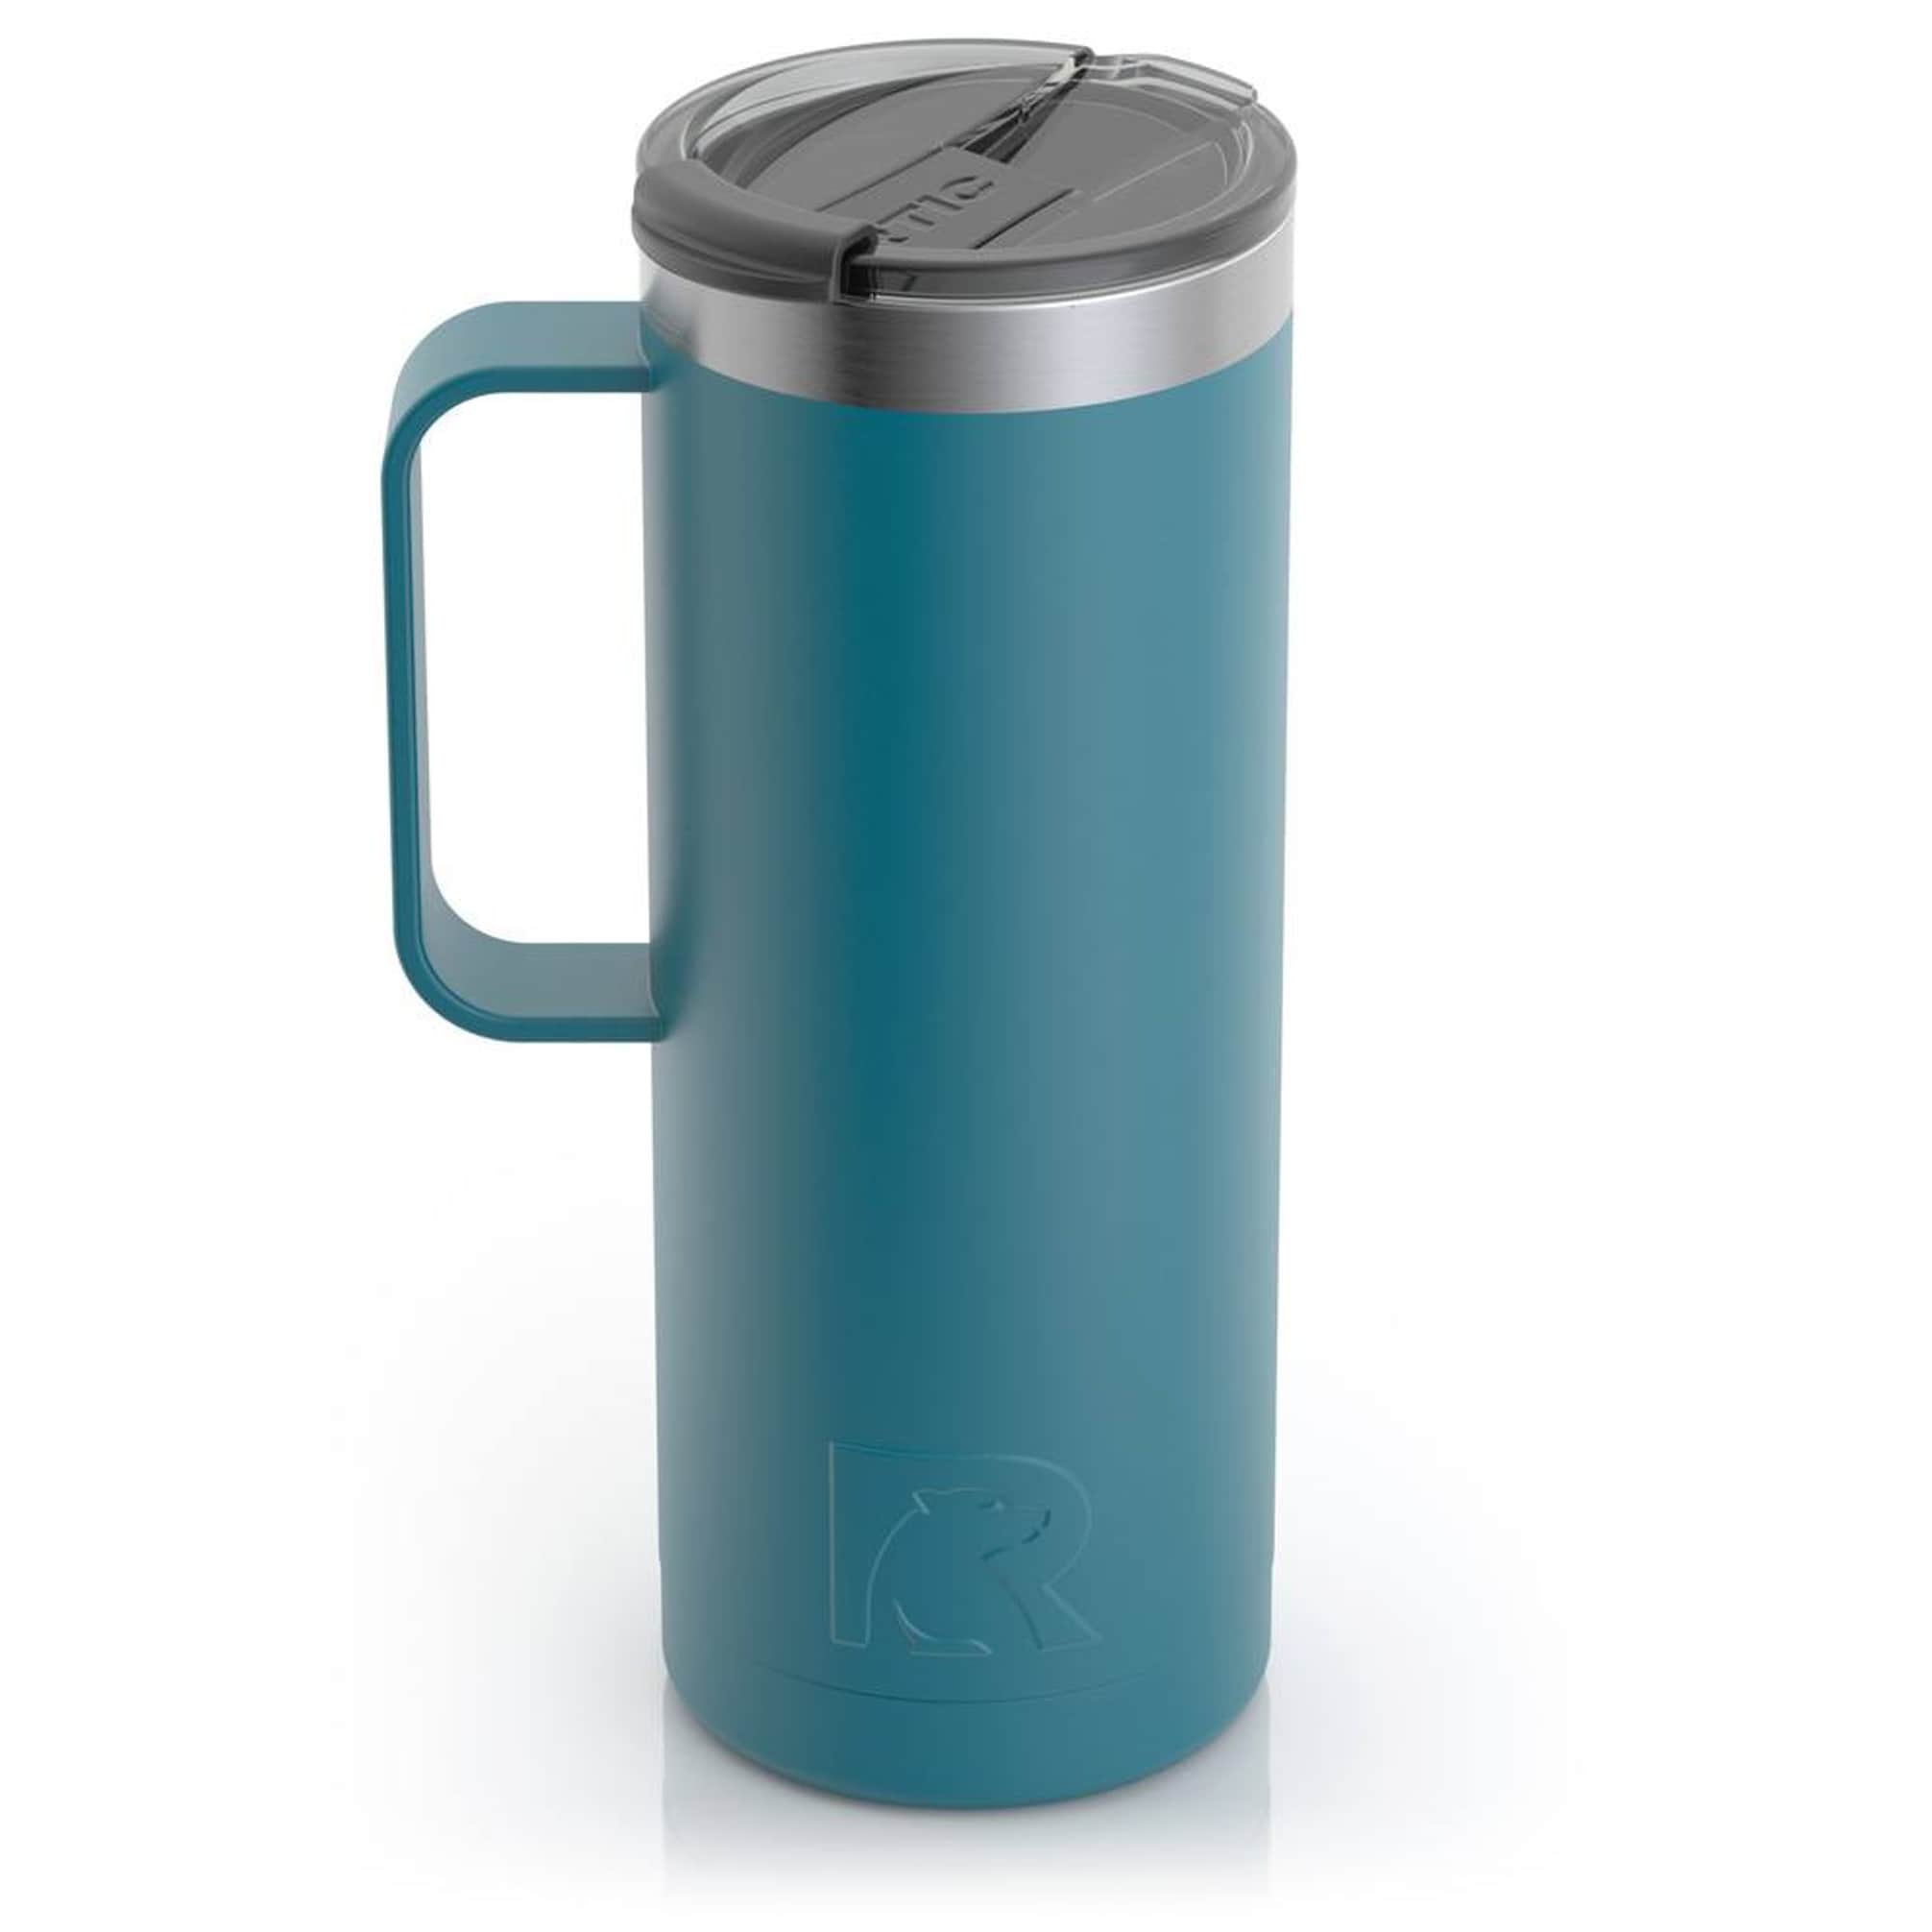 RTIC 20oz. Thermal Tumbler Stainless Steel Coffee Mug/Travel Cup Cold/Hot  Teal